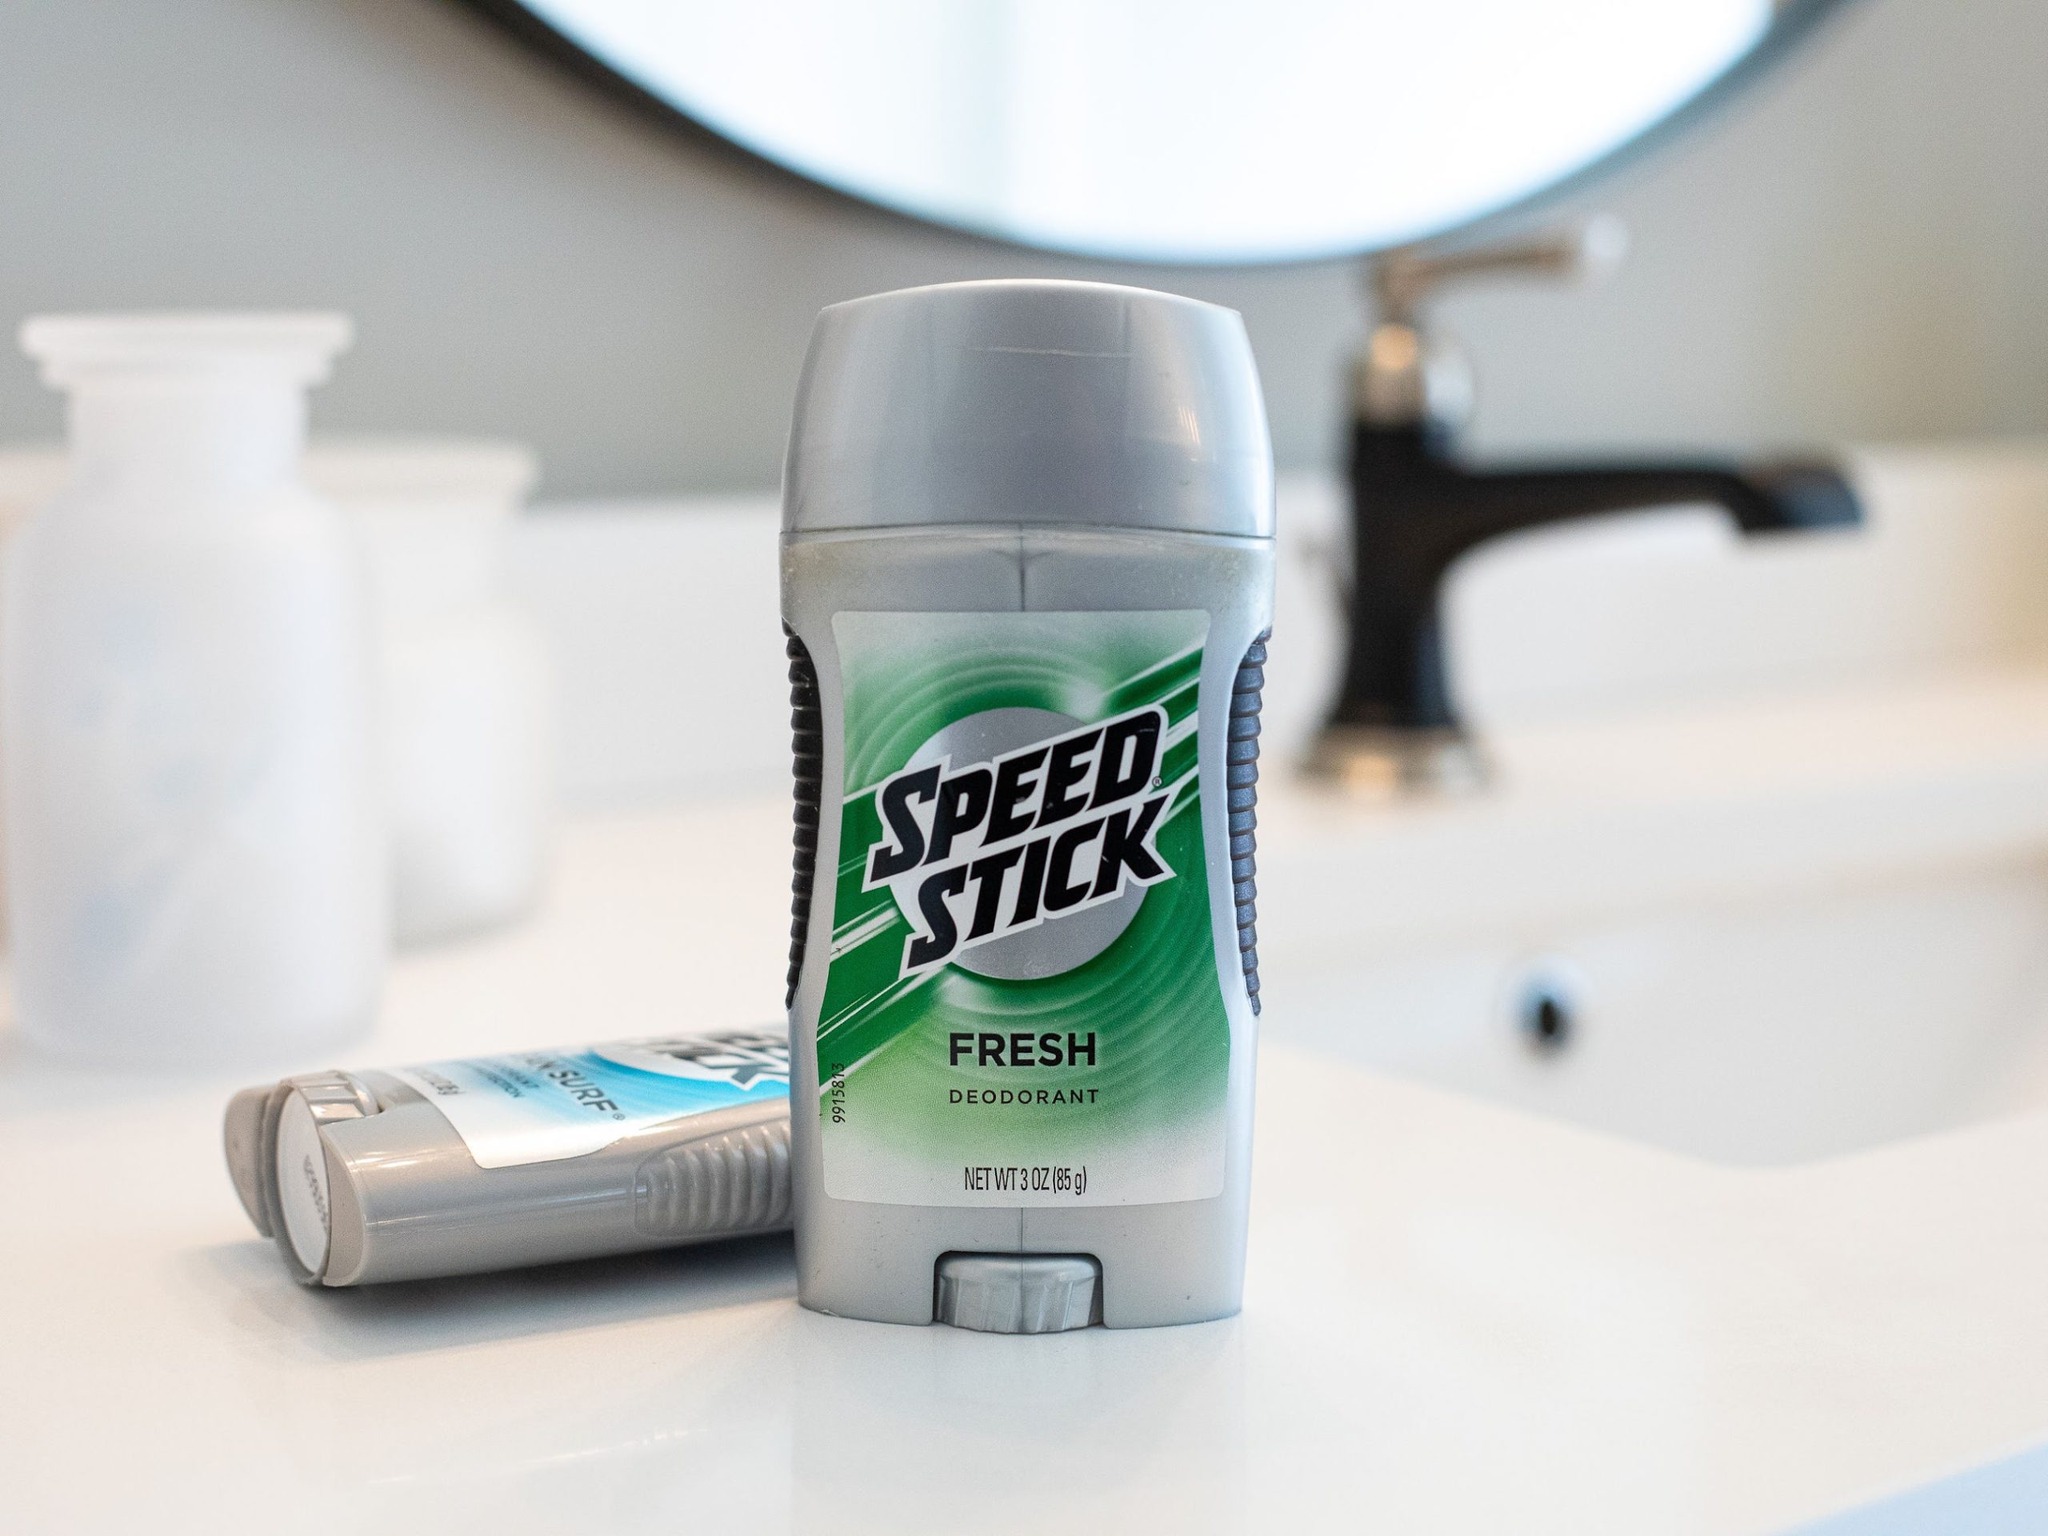 Speed Stick Deodorant As Low As $1.29 At Kroger